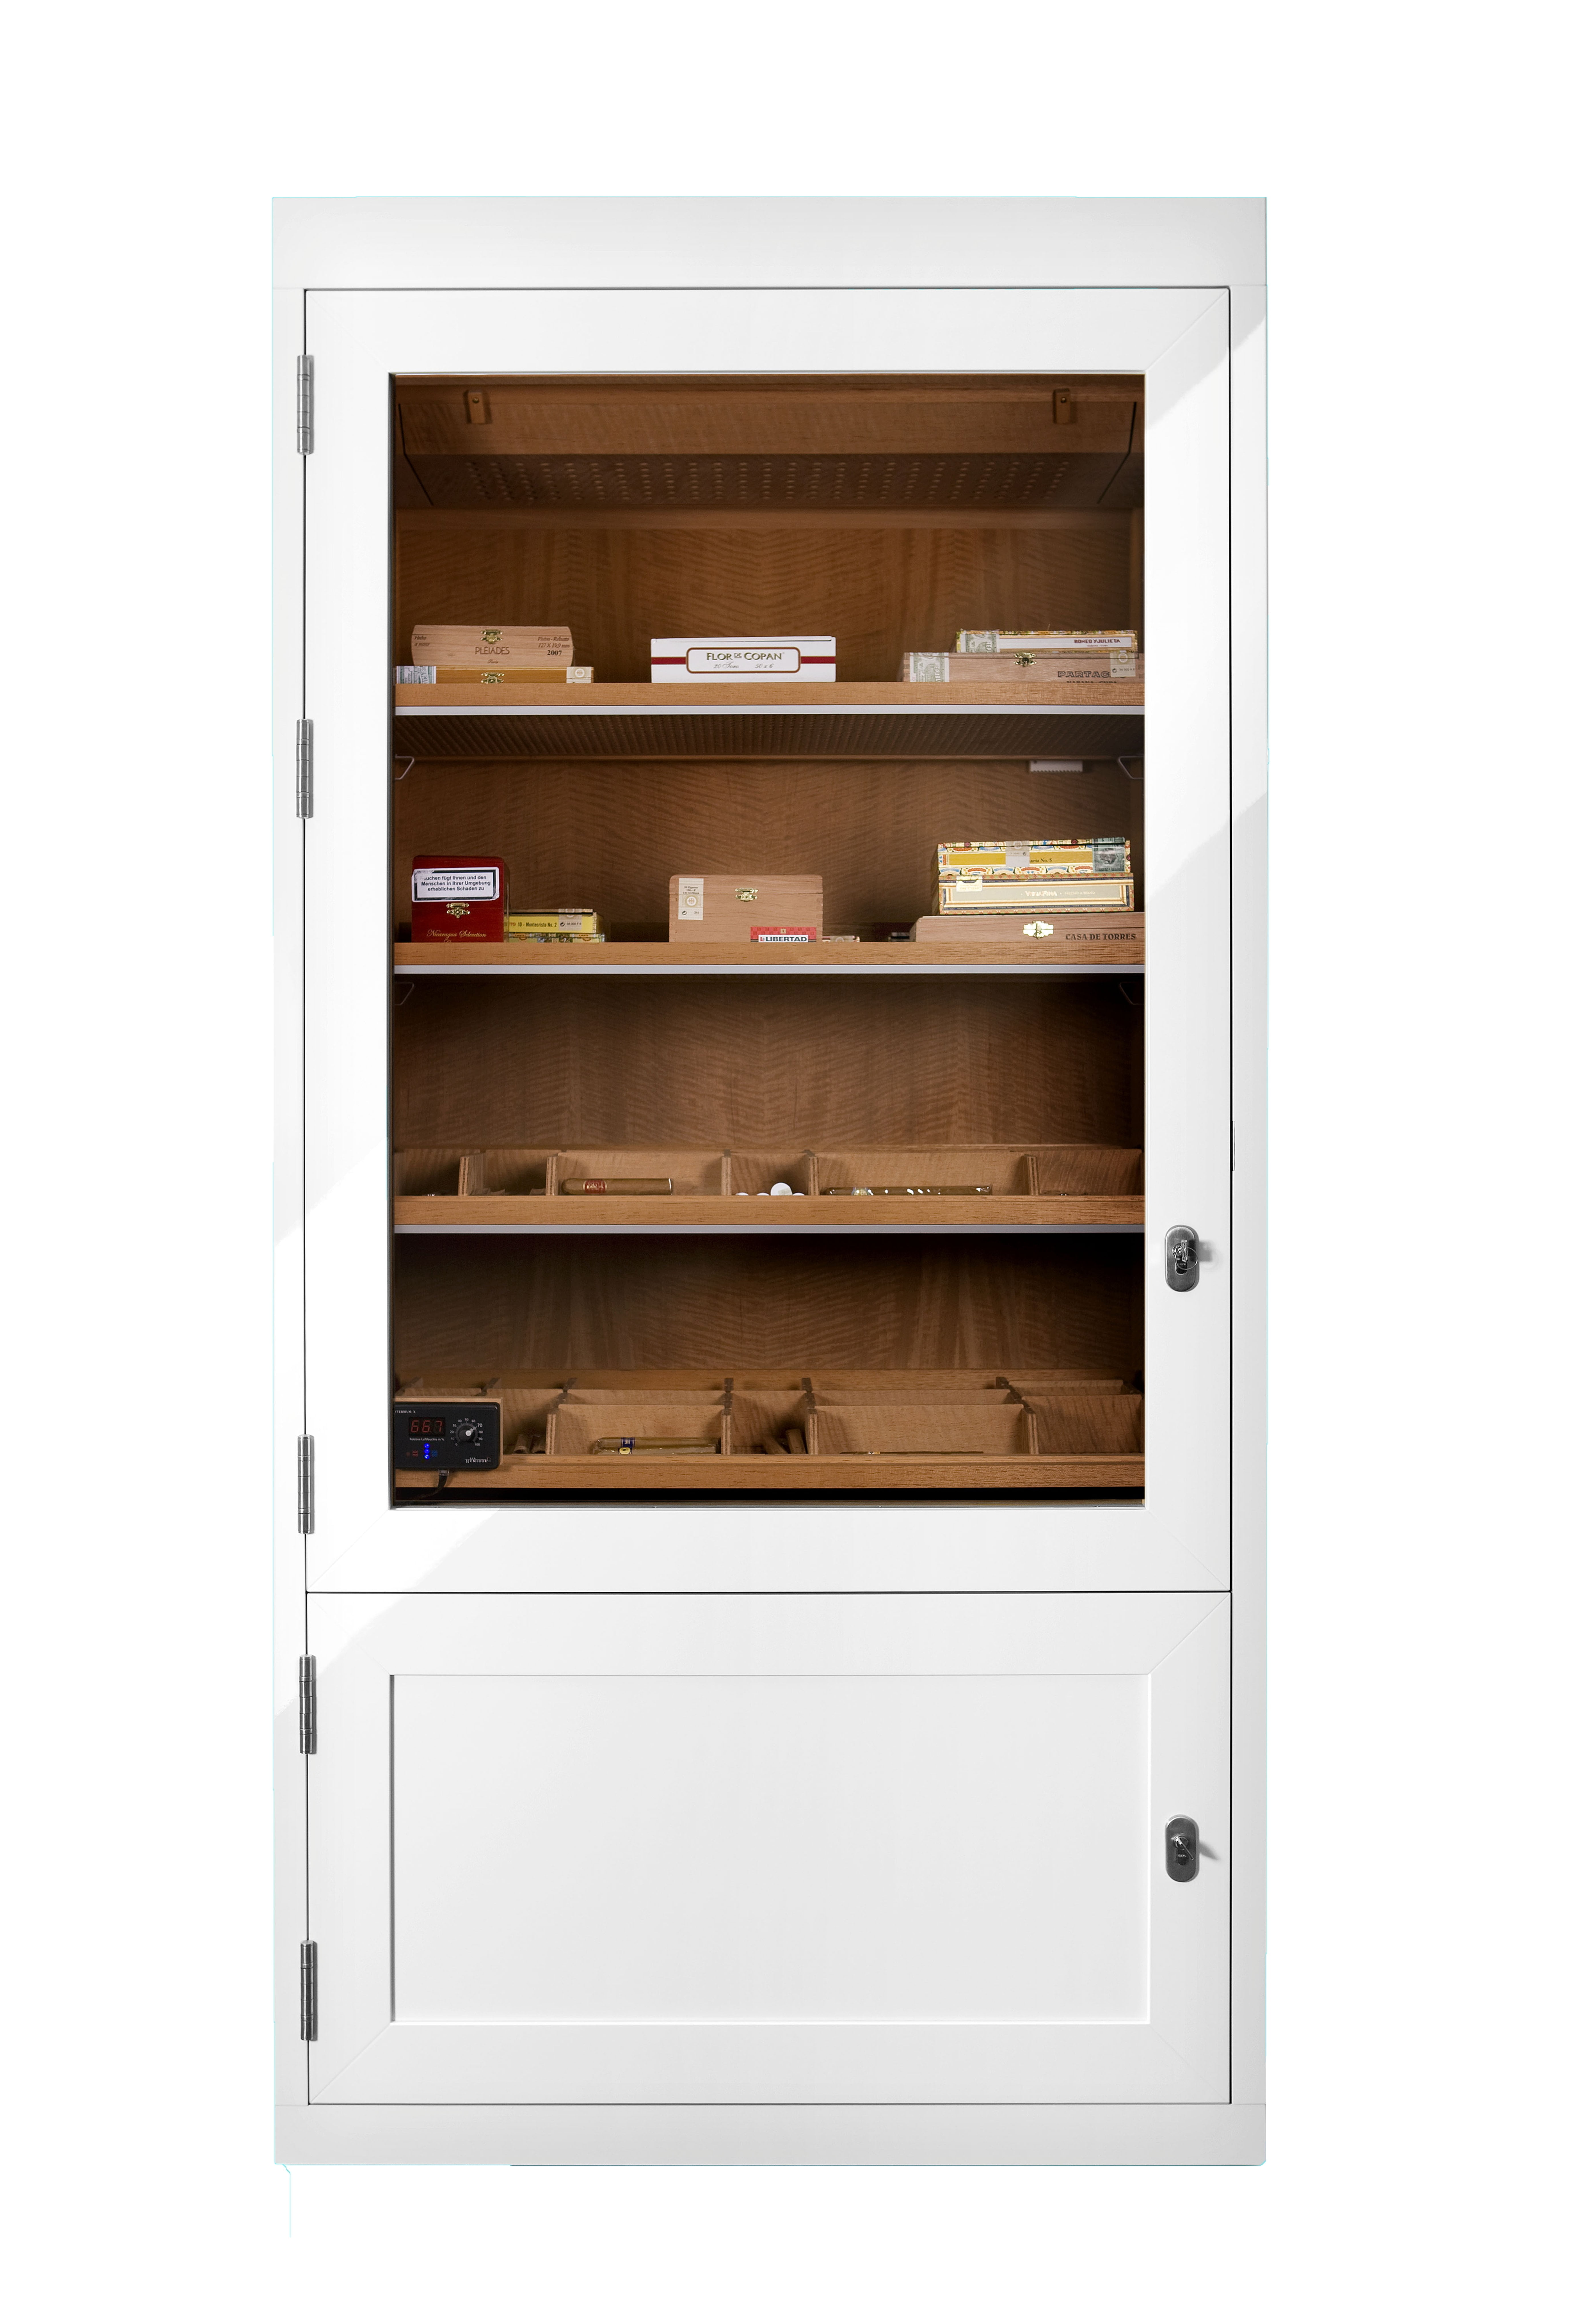 Cigar cabinet from Gerber made in Germany electronic humidification in white lacquer. The inner cabinet is made from Spanish Cedar